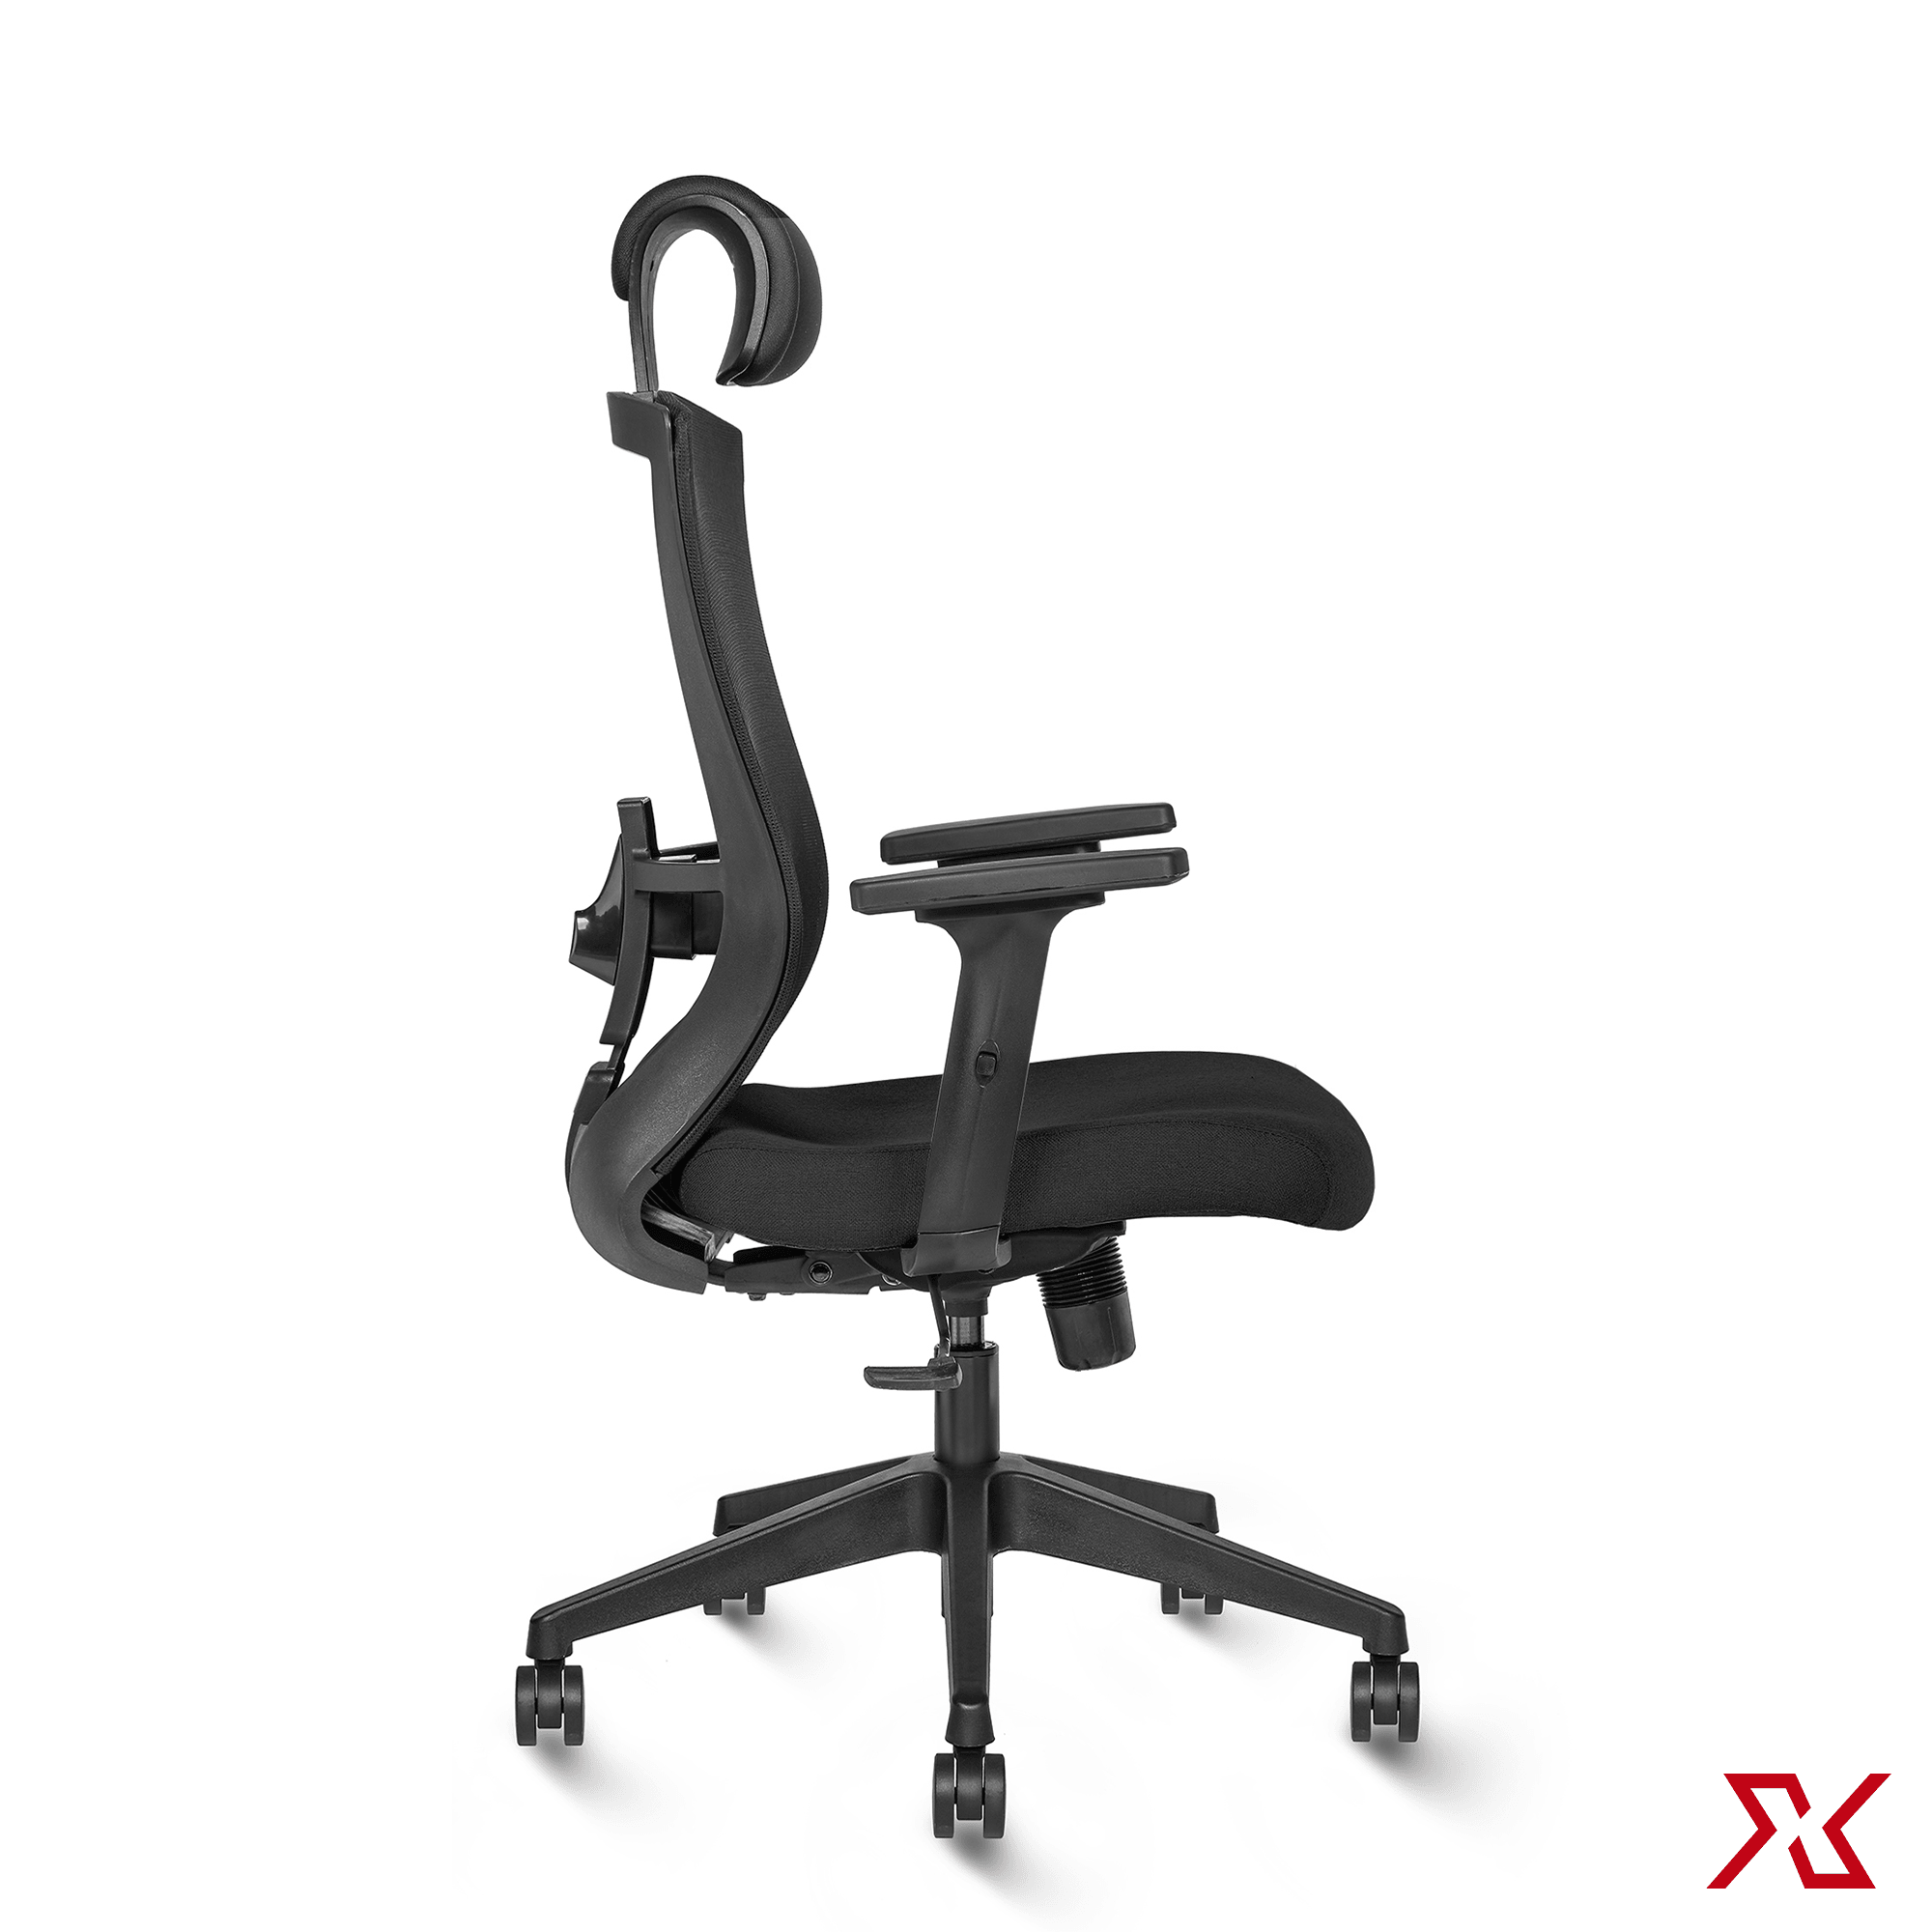 ZINC High Back LX (Black Chair) - Exclusiff Seating Sytems